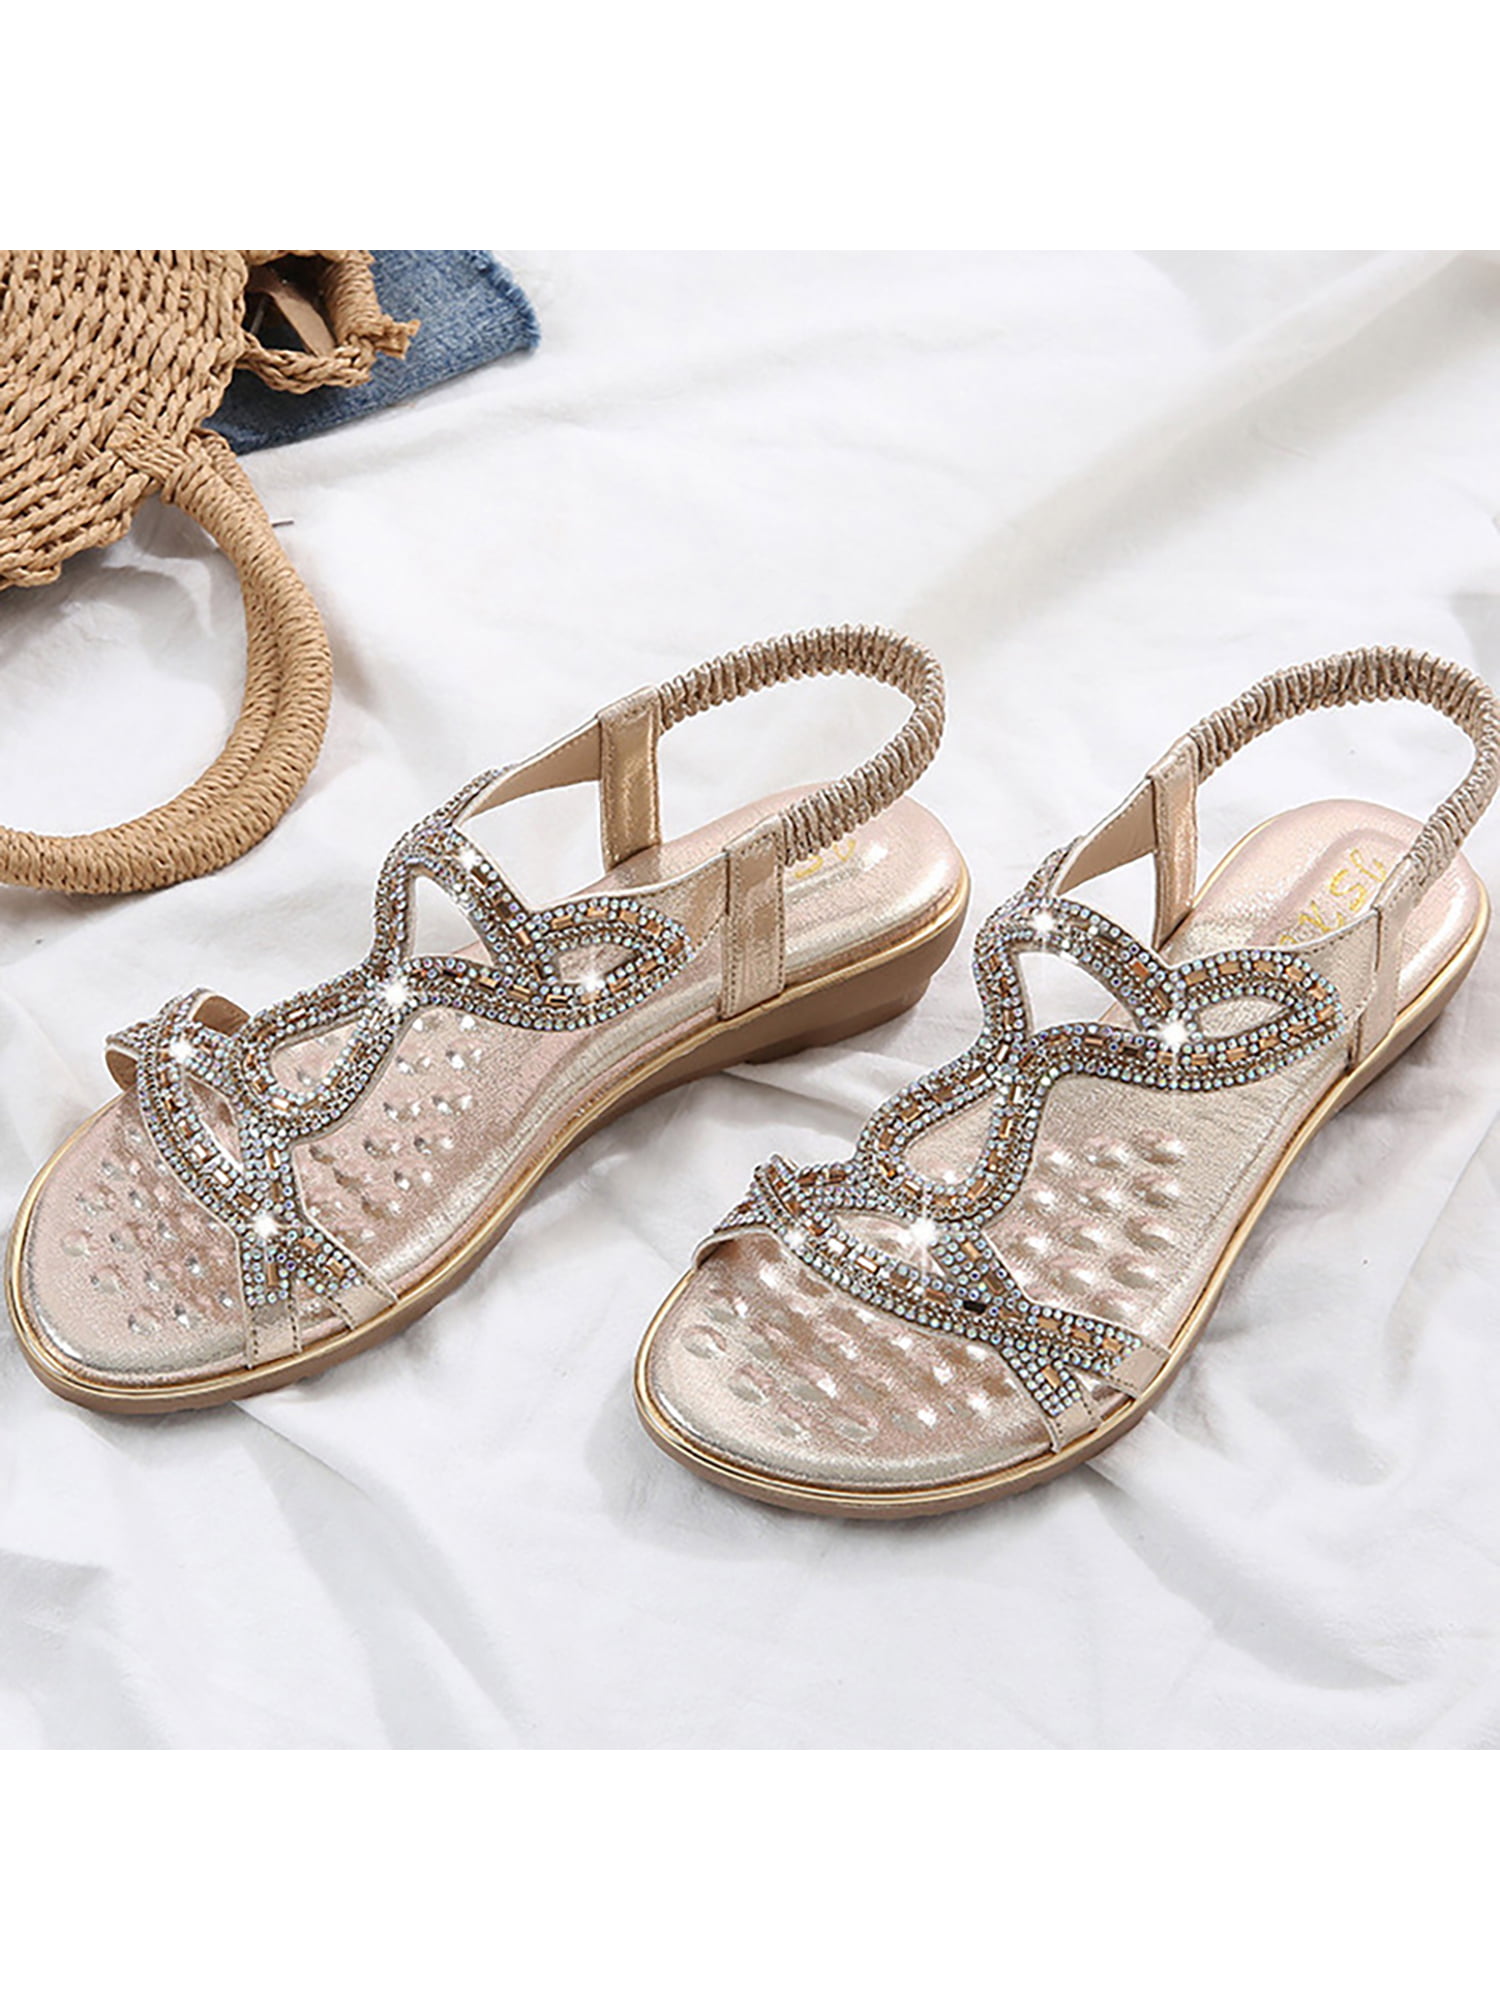 New Womens Flat Diamante Sandals Slingback Embellished Comfy Holiday Shoes Sizes 